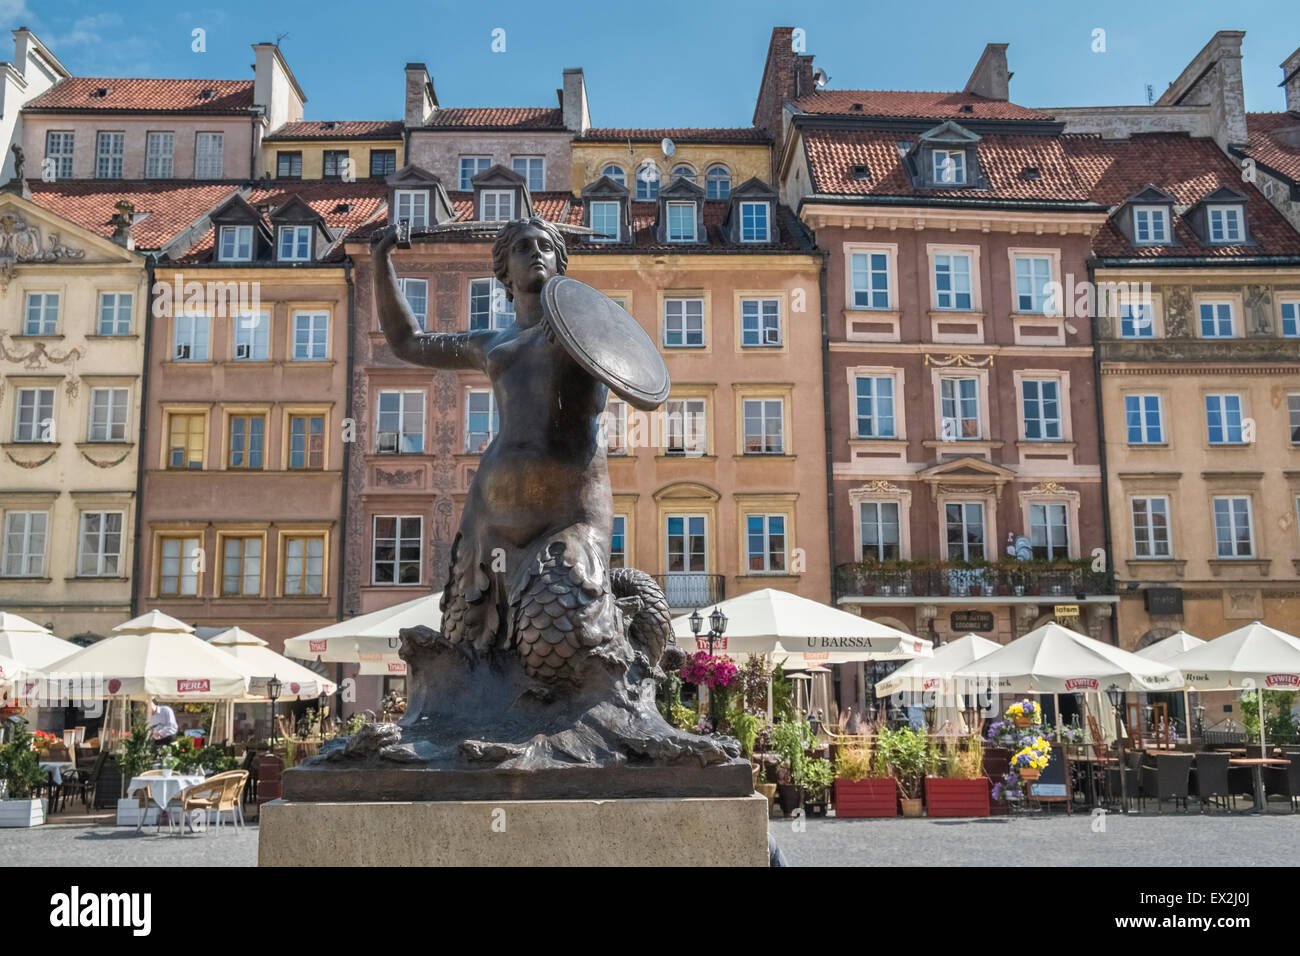 Mermaid of Warsaw sculpture in Old Town Square, Warsaw, Poland Stock Photo